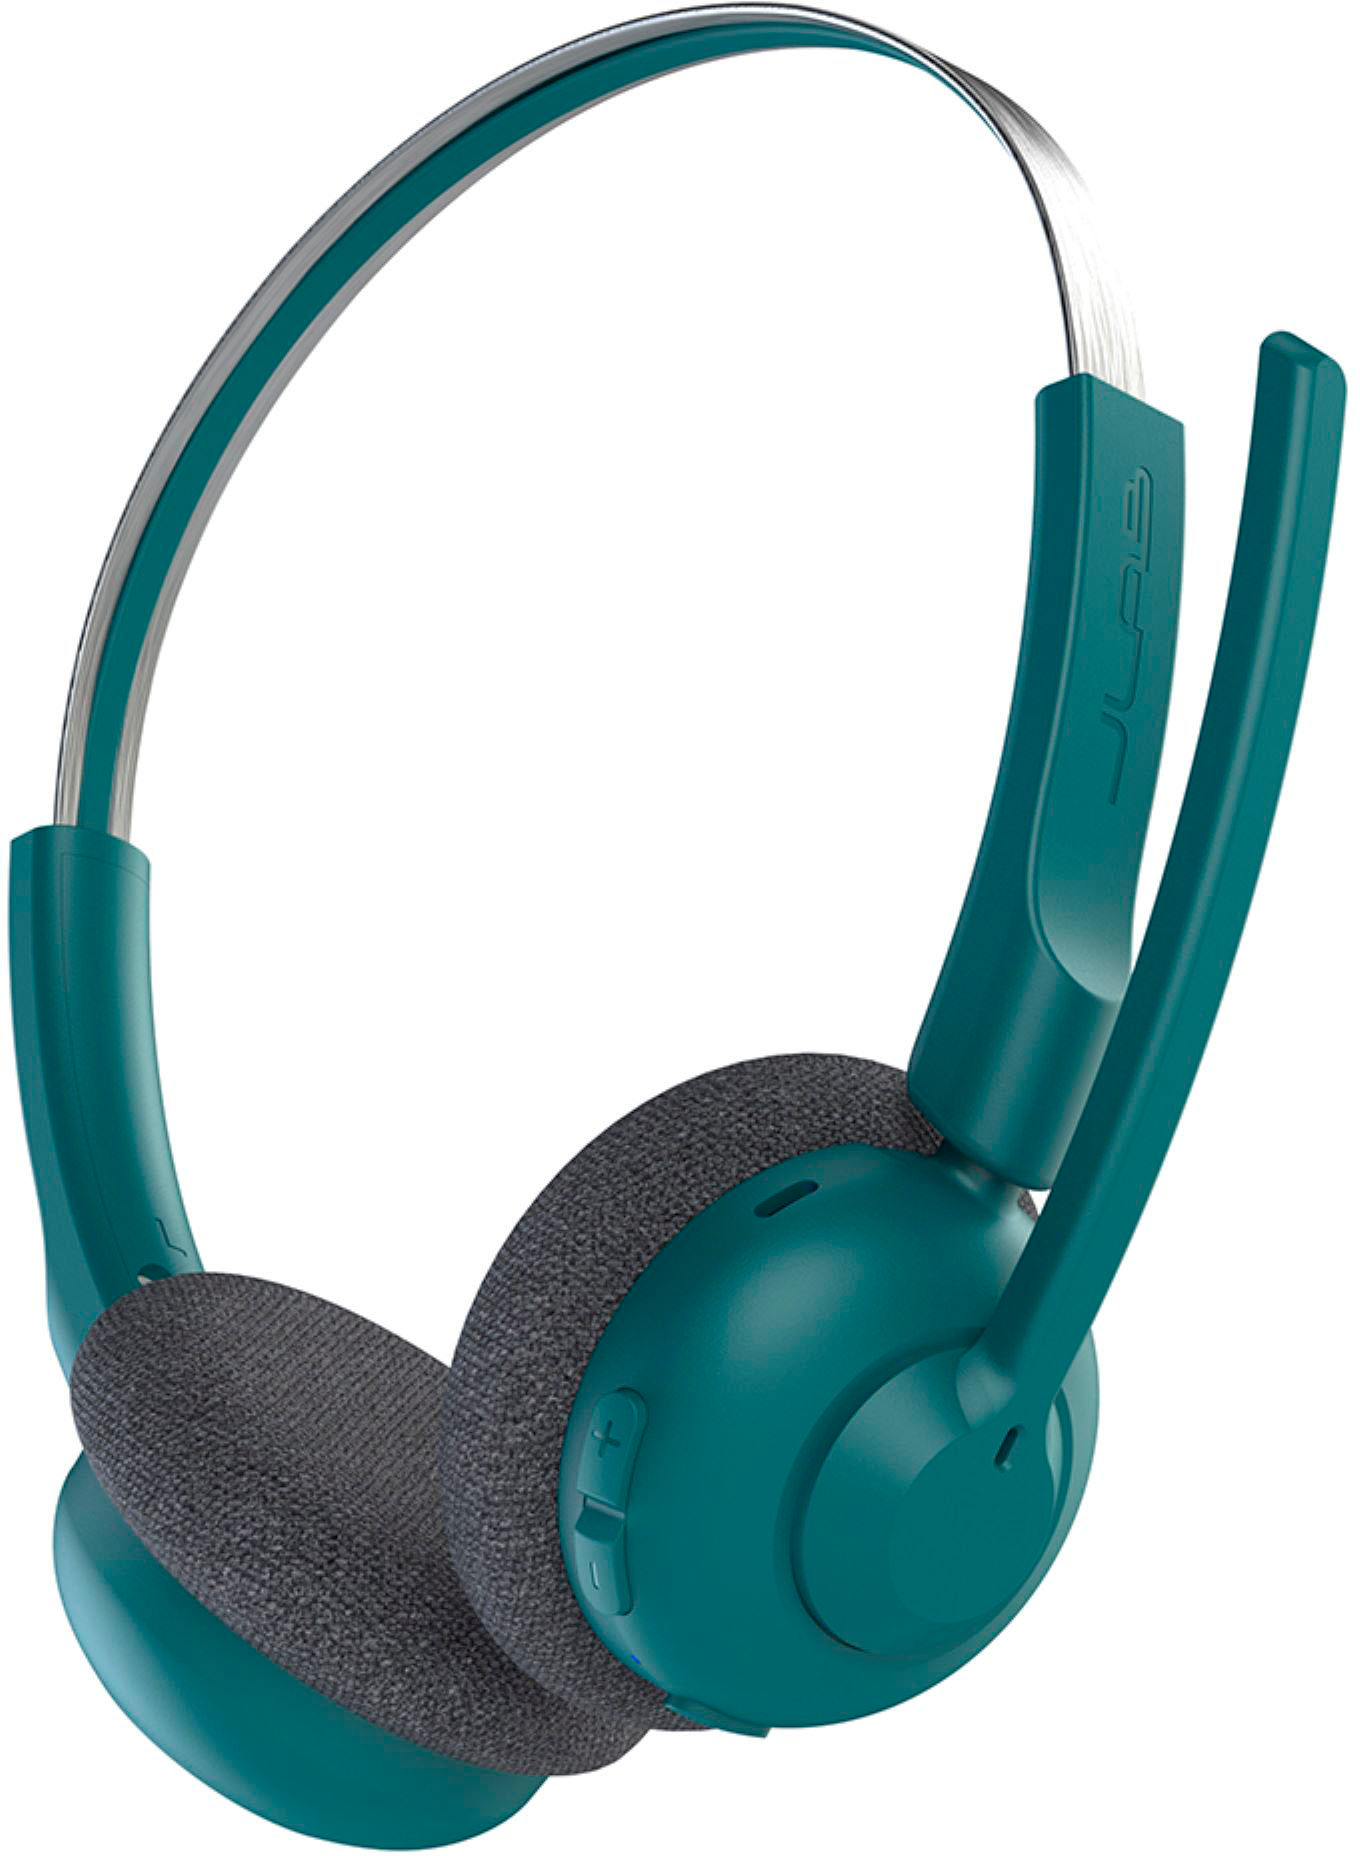 Angle View: Logitech - Zone 300 Wireless Bluetooth On-ear Headset With Noise-Canceling Microphone - Off-White